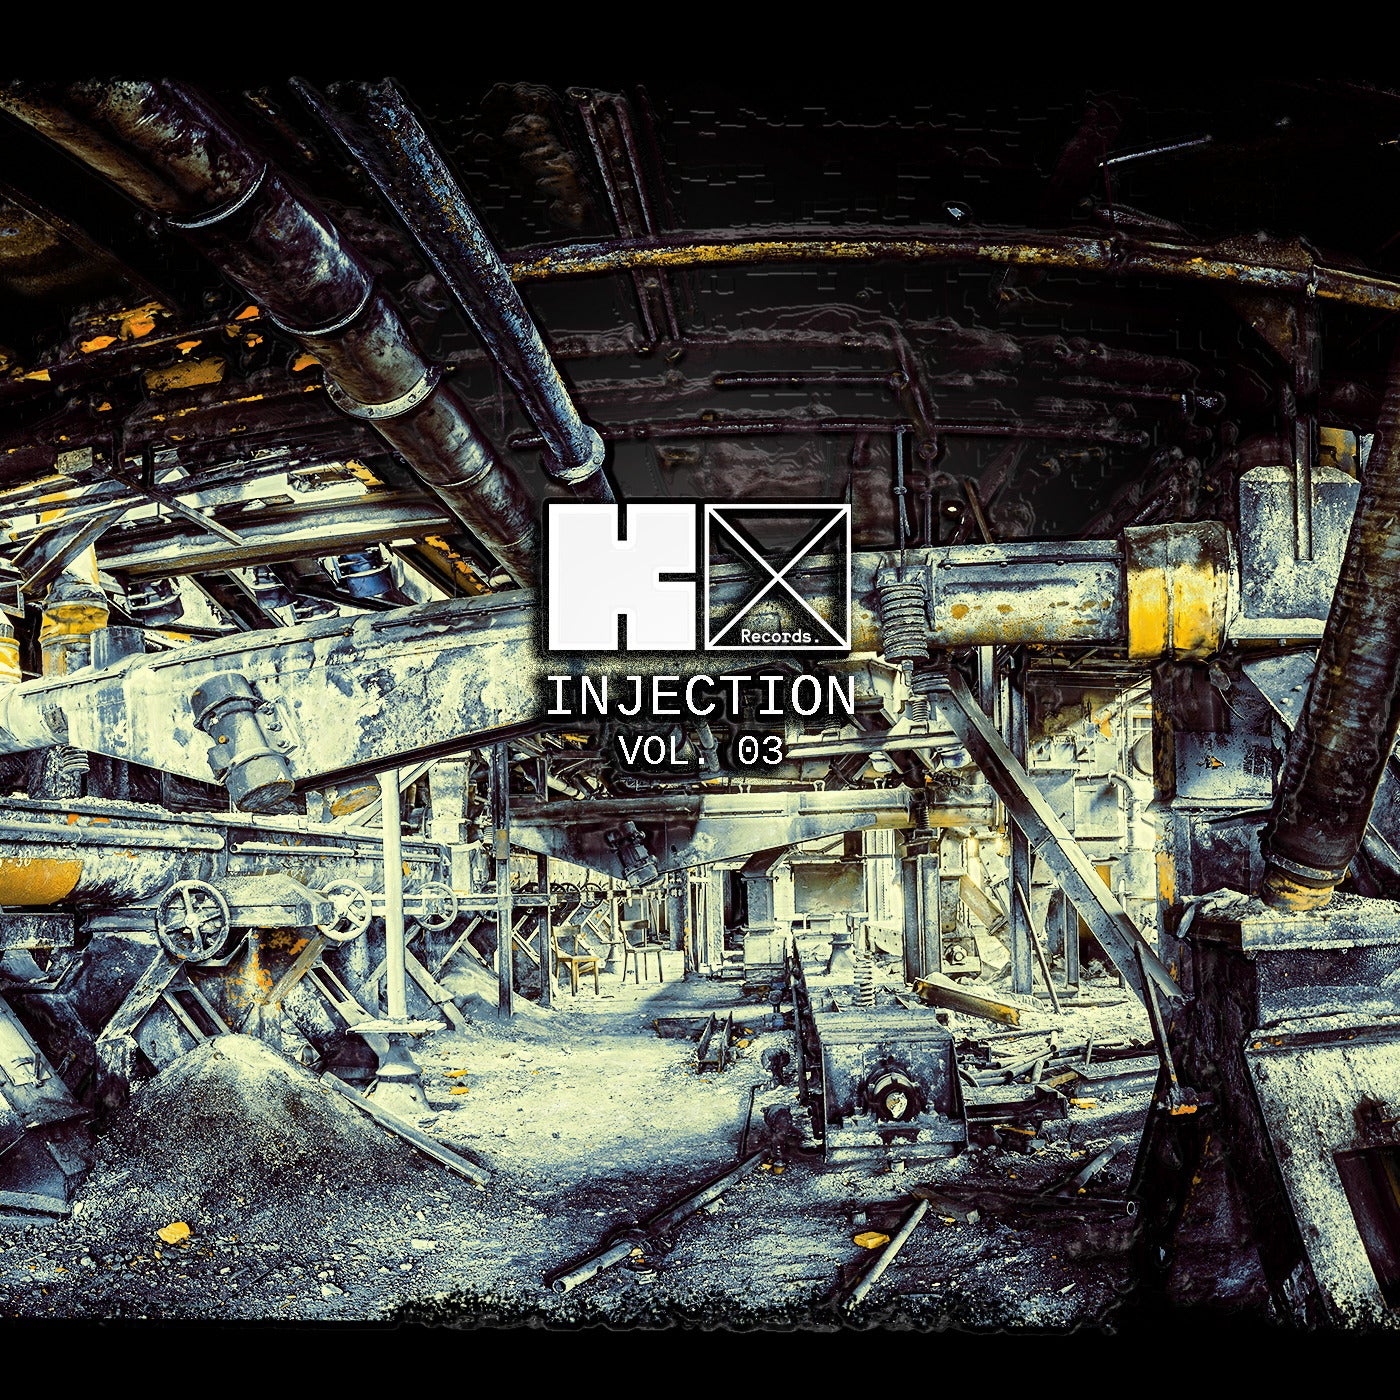 Injection Vol. 03